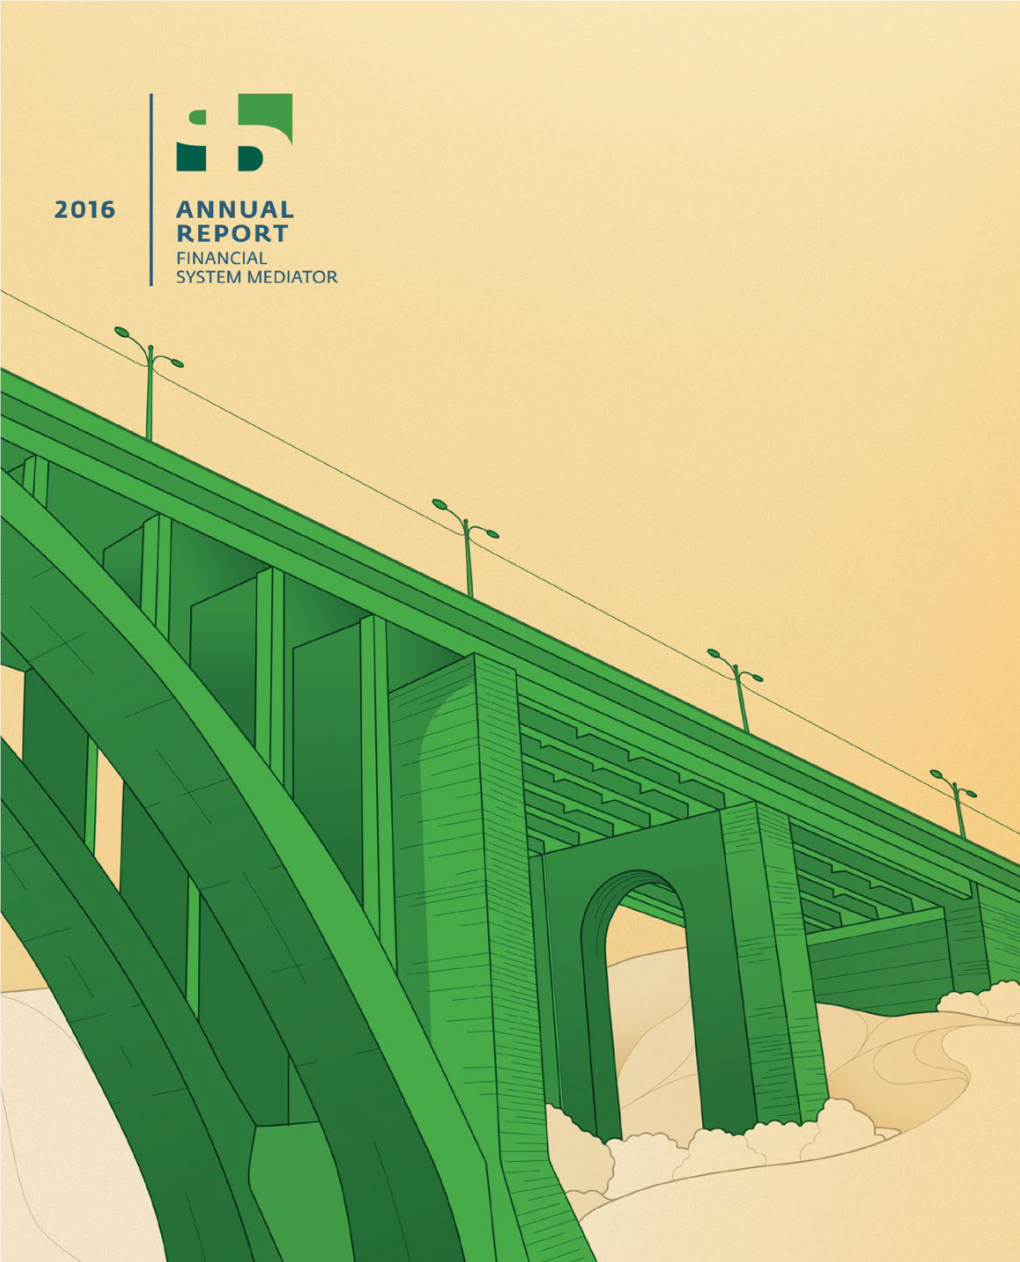 Annual Report of Financial System Mediator, Since the Role of a Bridge, Like the Mission of the Mediator, Is to Bring Together Two Opposite Sites